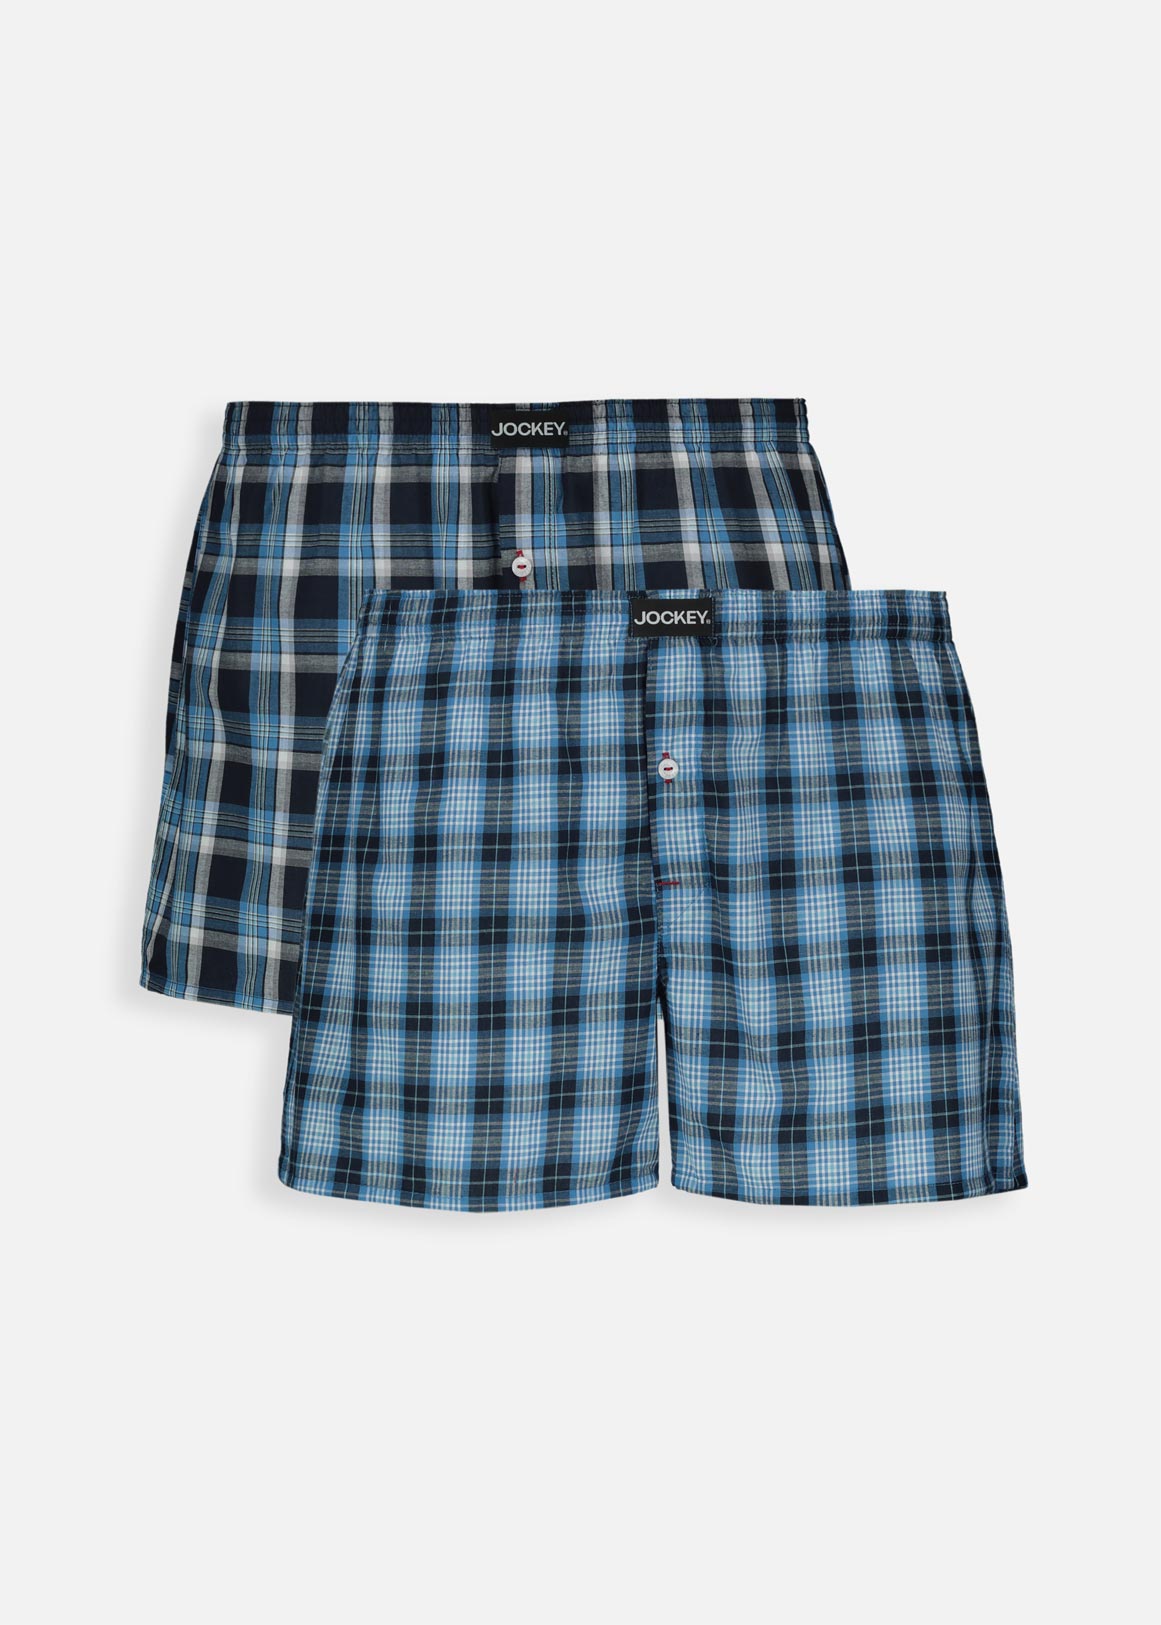 SS22 2PK BOXER XBLUE - Woolworths Mauritius Online